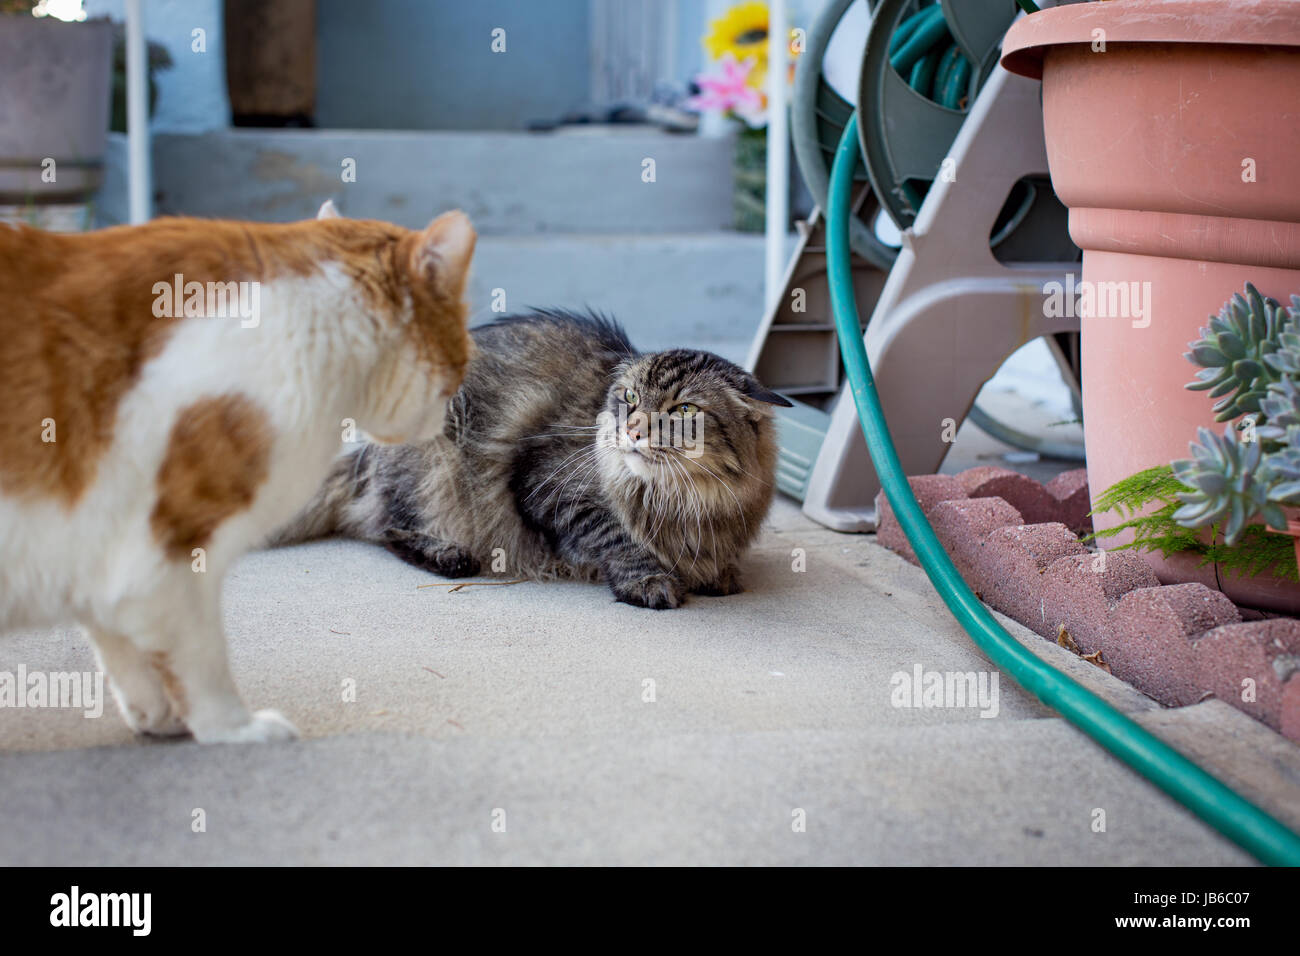 Orange and white male tabby cat displaying dominant behavior over a Maine Coon female tabby cat who is crouched with ears back. Stock Photo